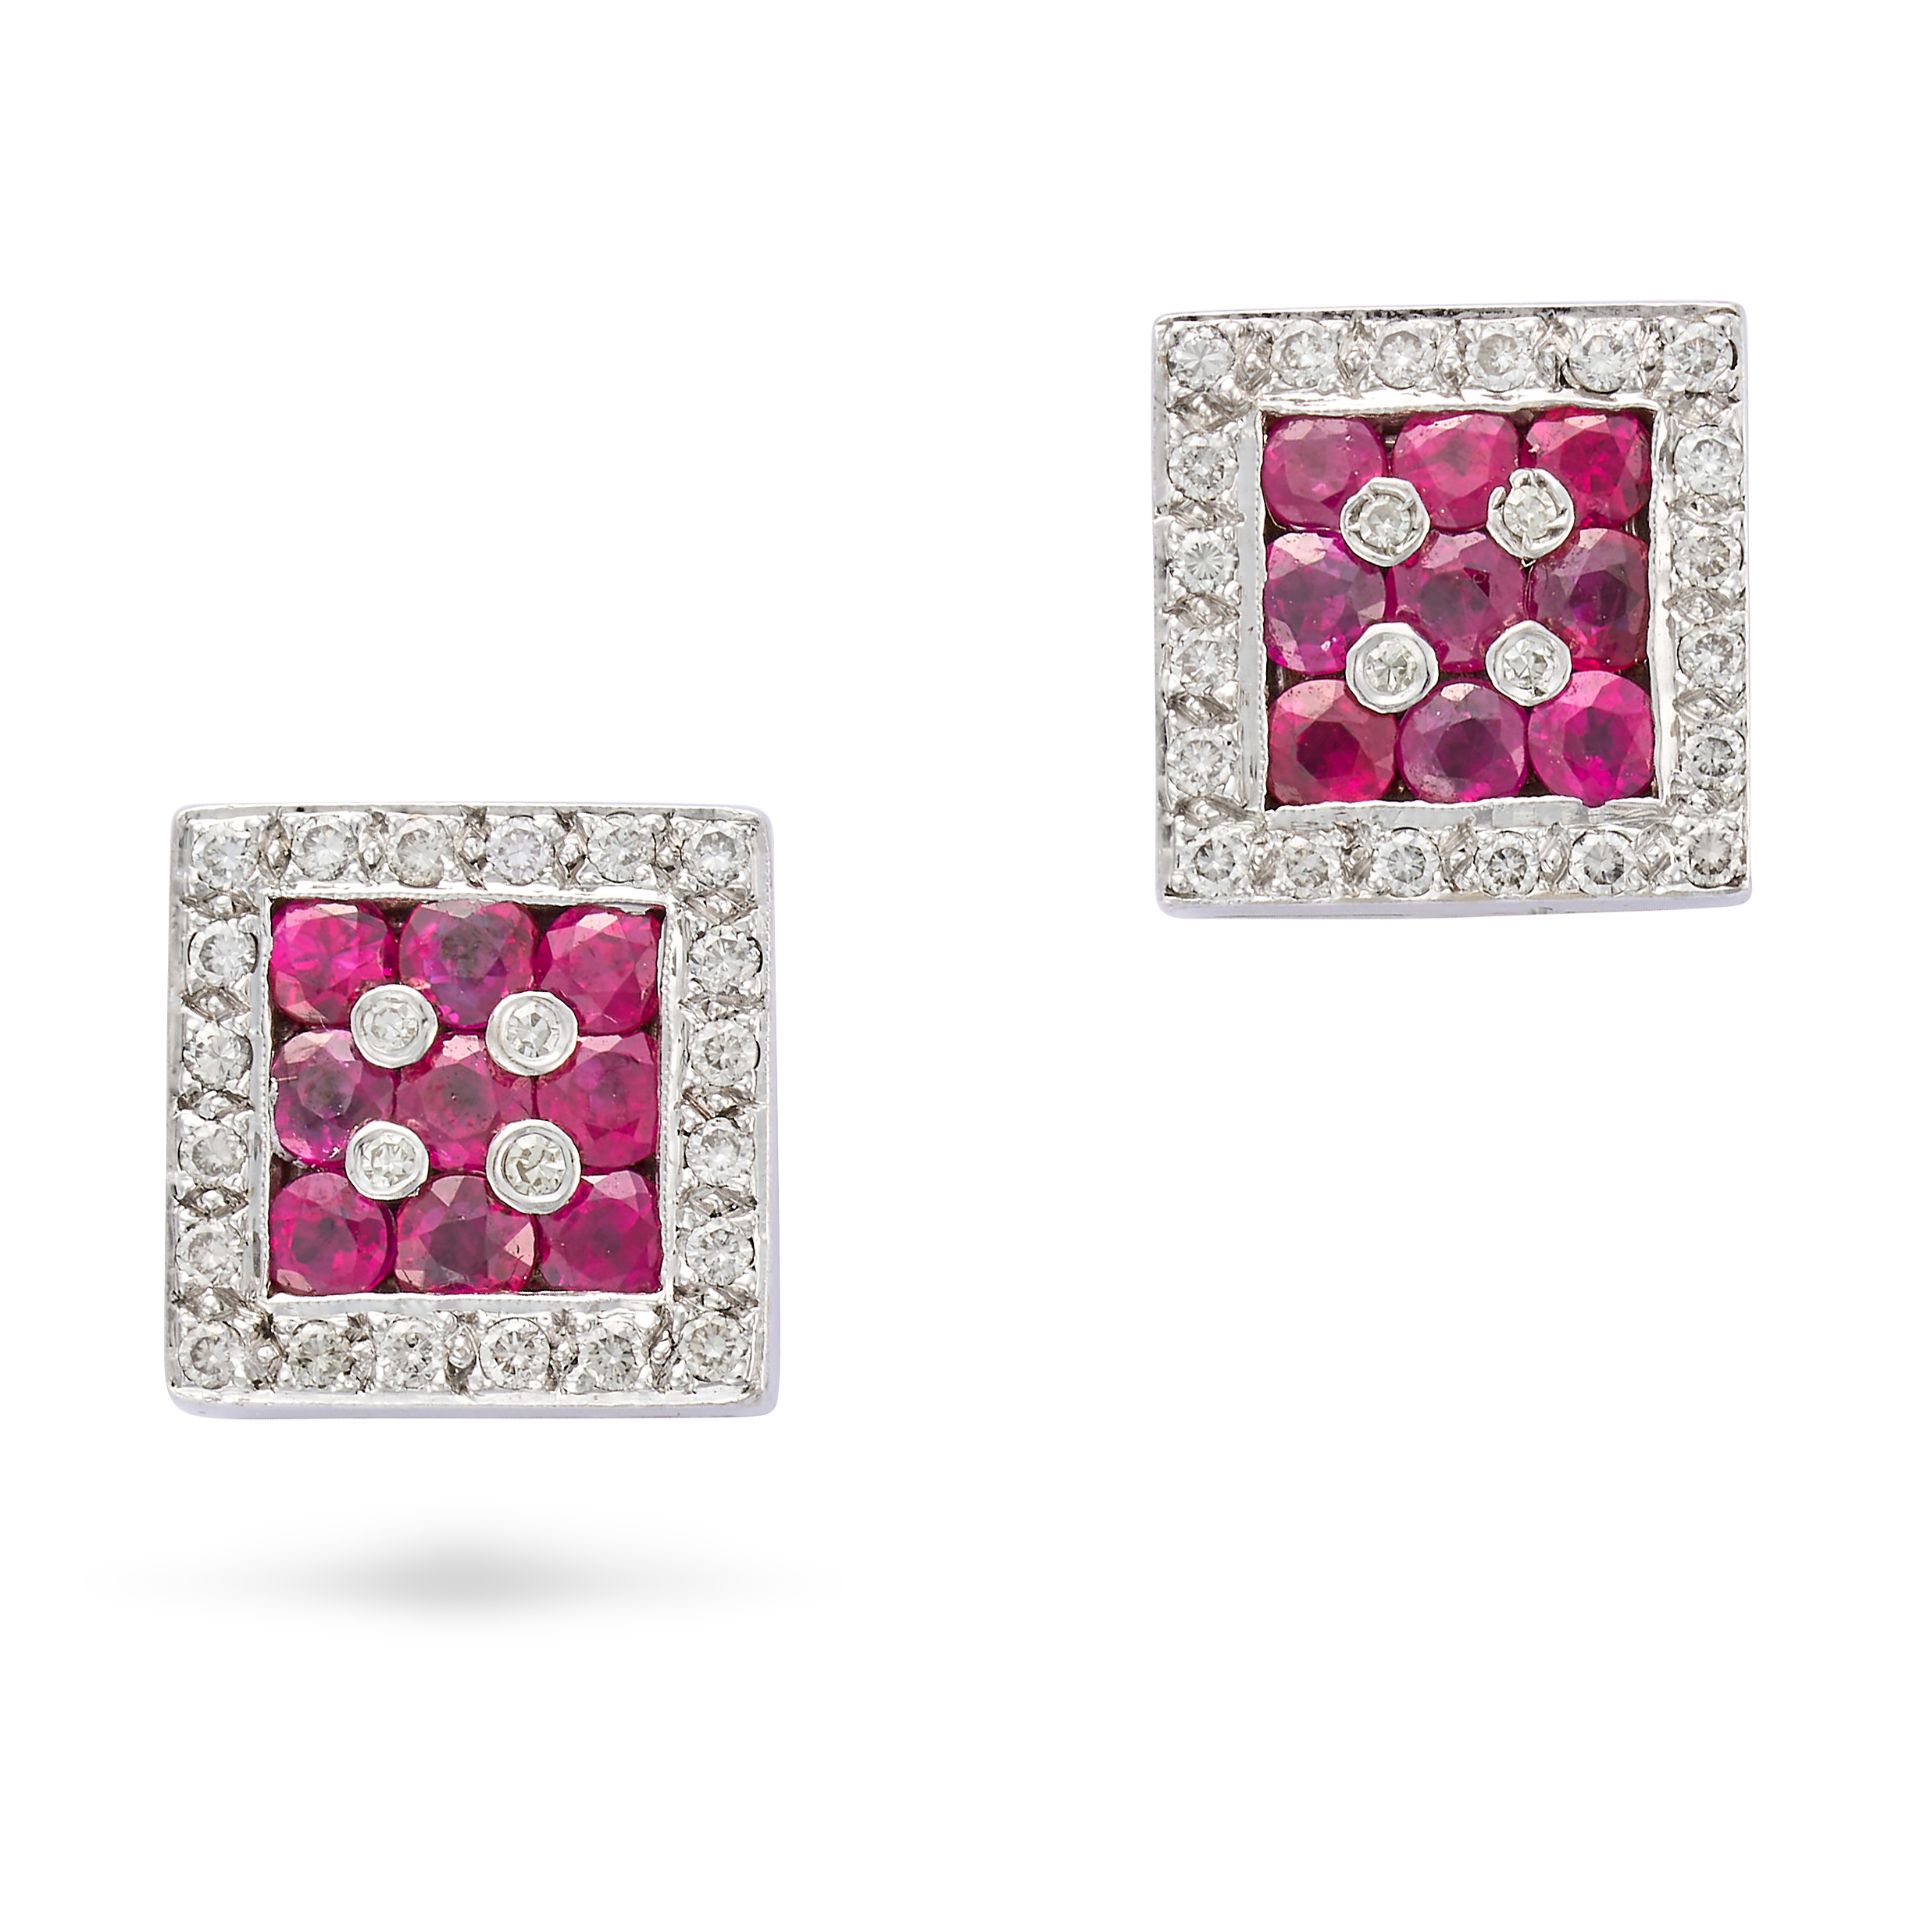 A PAIR OF RUBY AND DIAMOND STUD EARRINGS each set with round cut rubies and round cut diamonds, n...